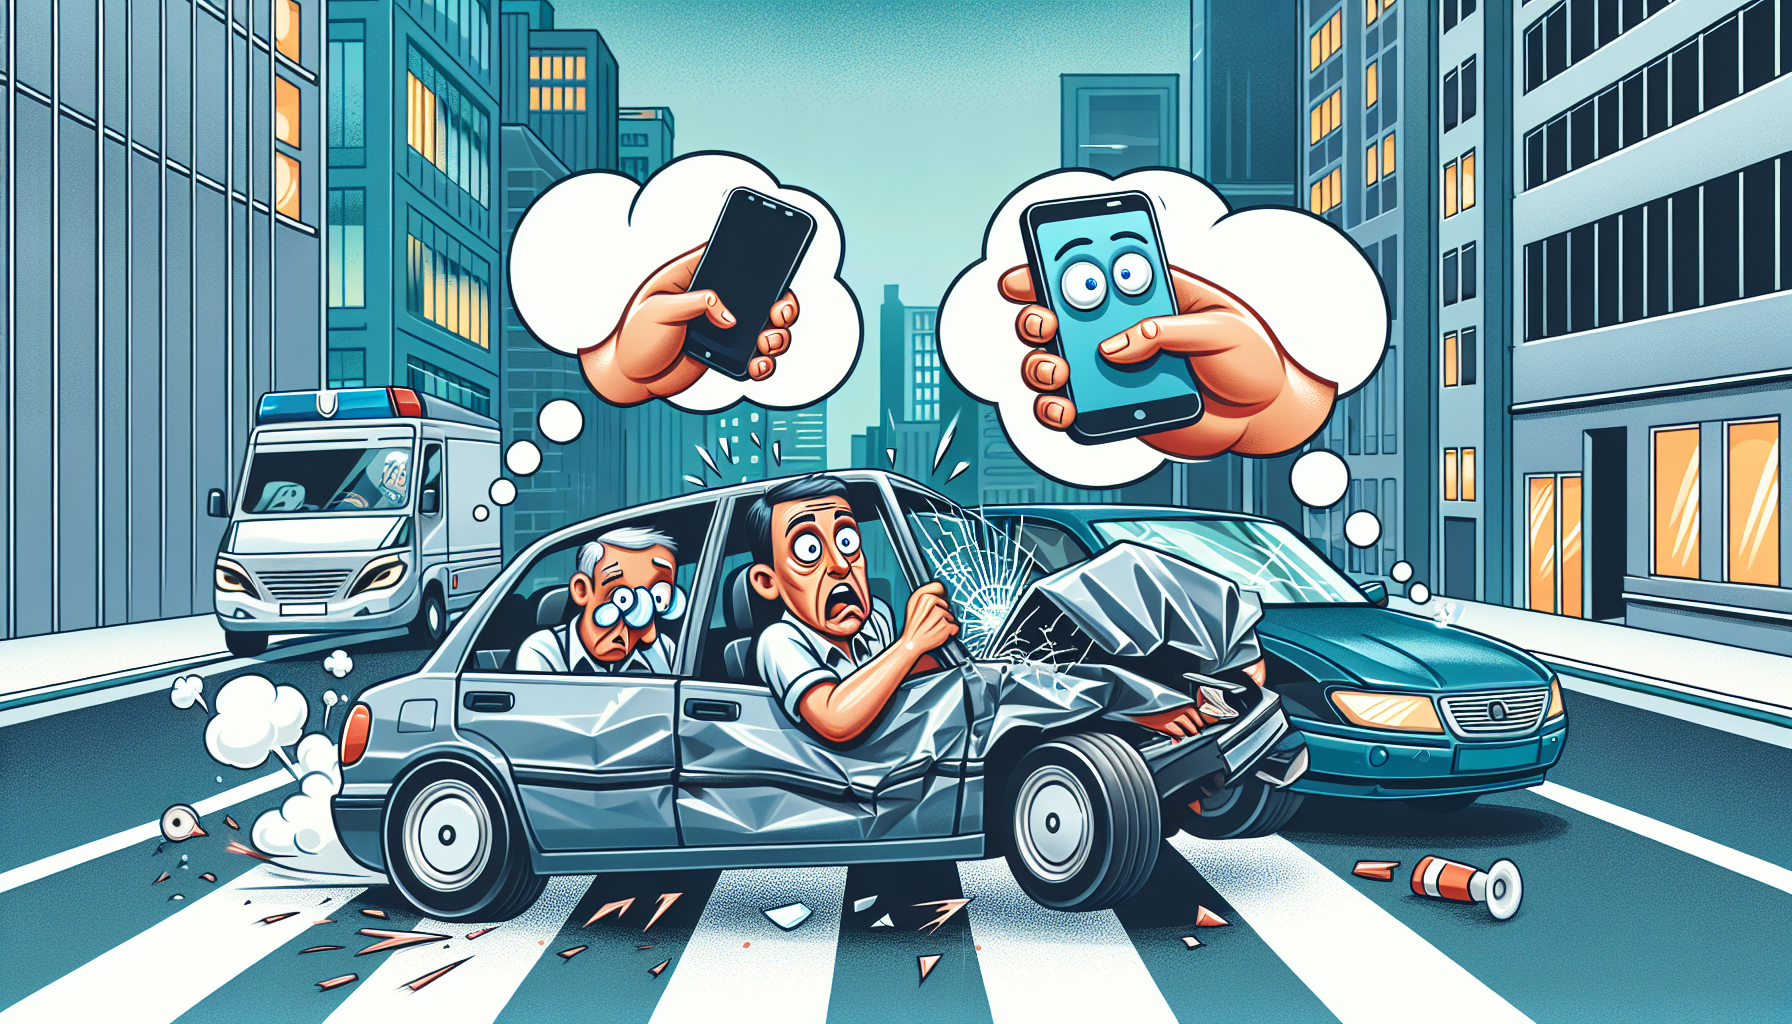 Car accident caused by distracted driving, car accident lawyer, car accident layer, lawyer for a car accident, attorney for a car accident, car accident attorney, accident lawyer, lawyer for accident, attorney accident, attorney auto accident, auto accident lawyer.